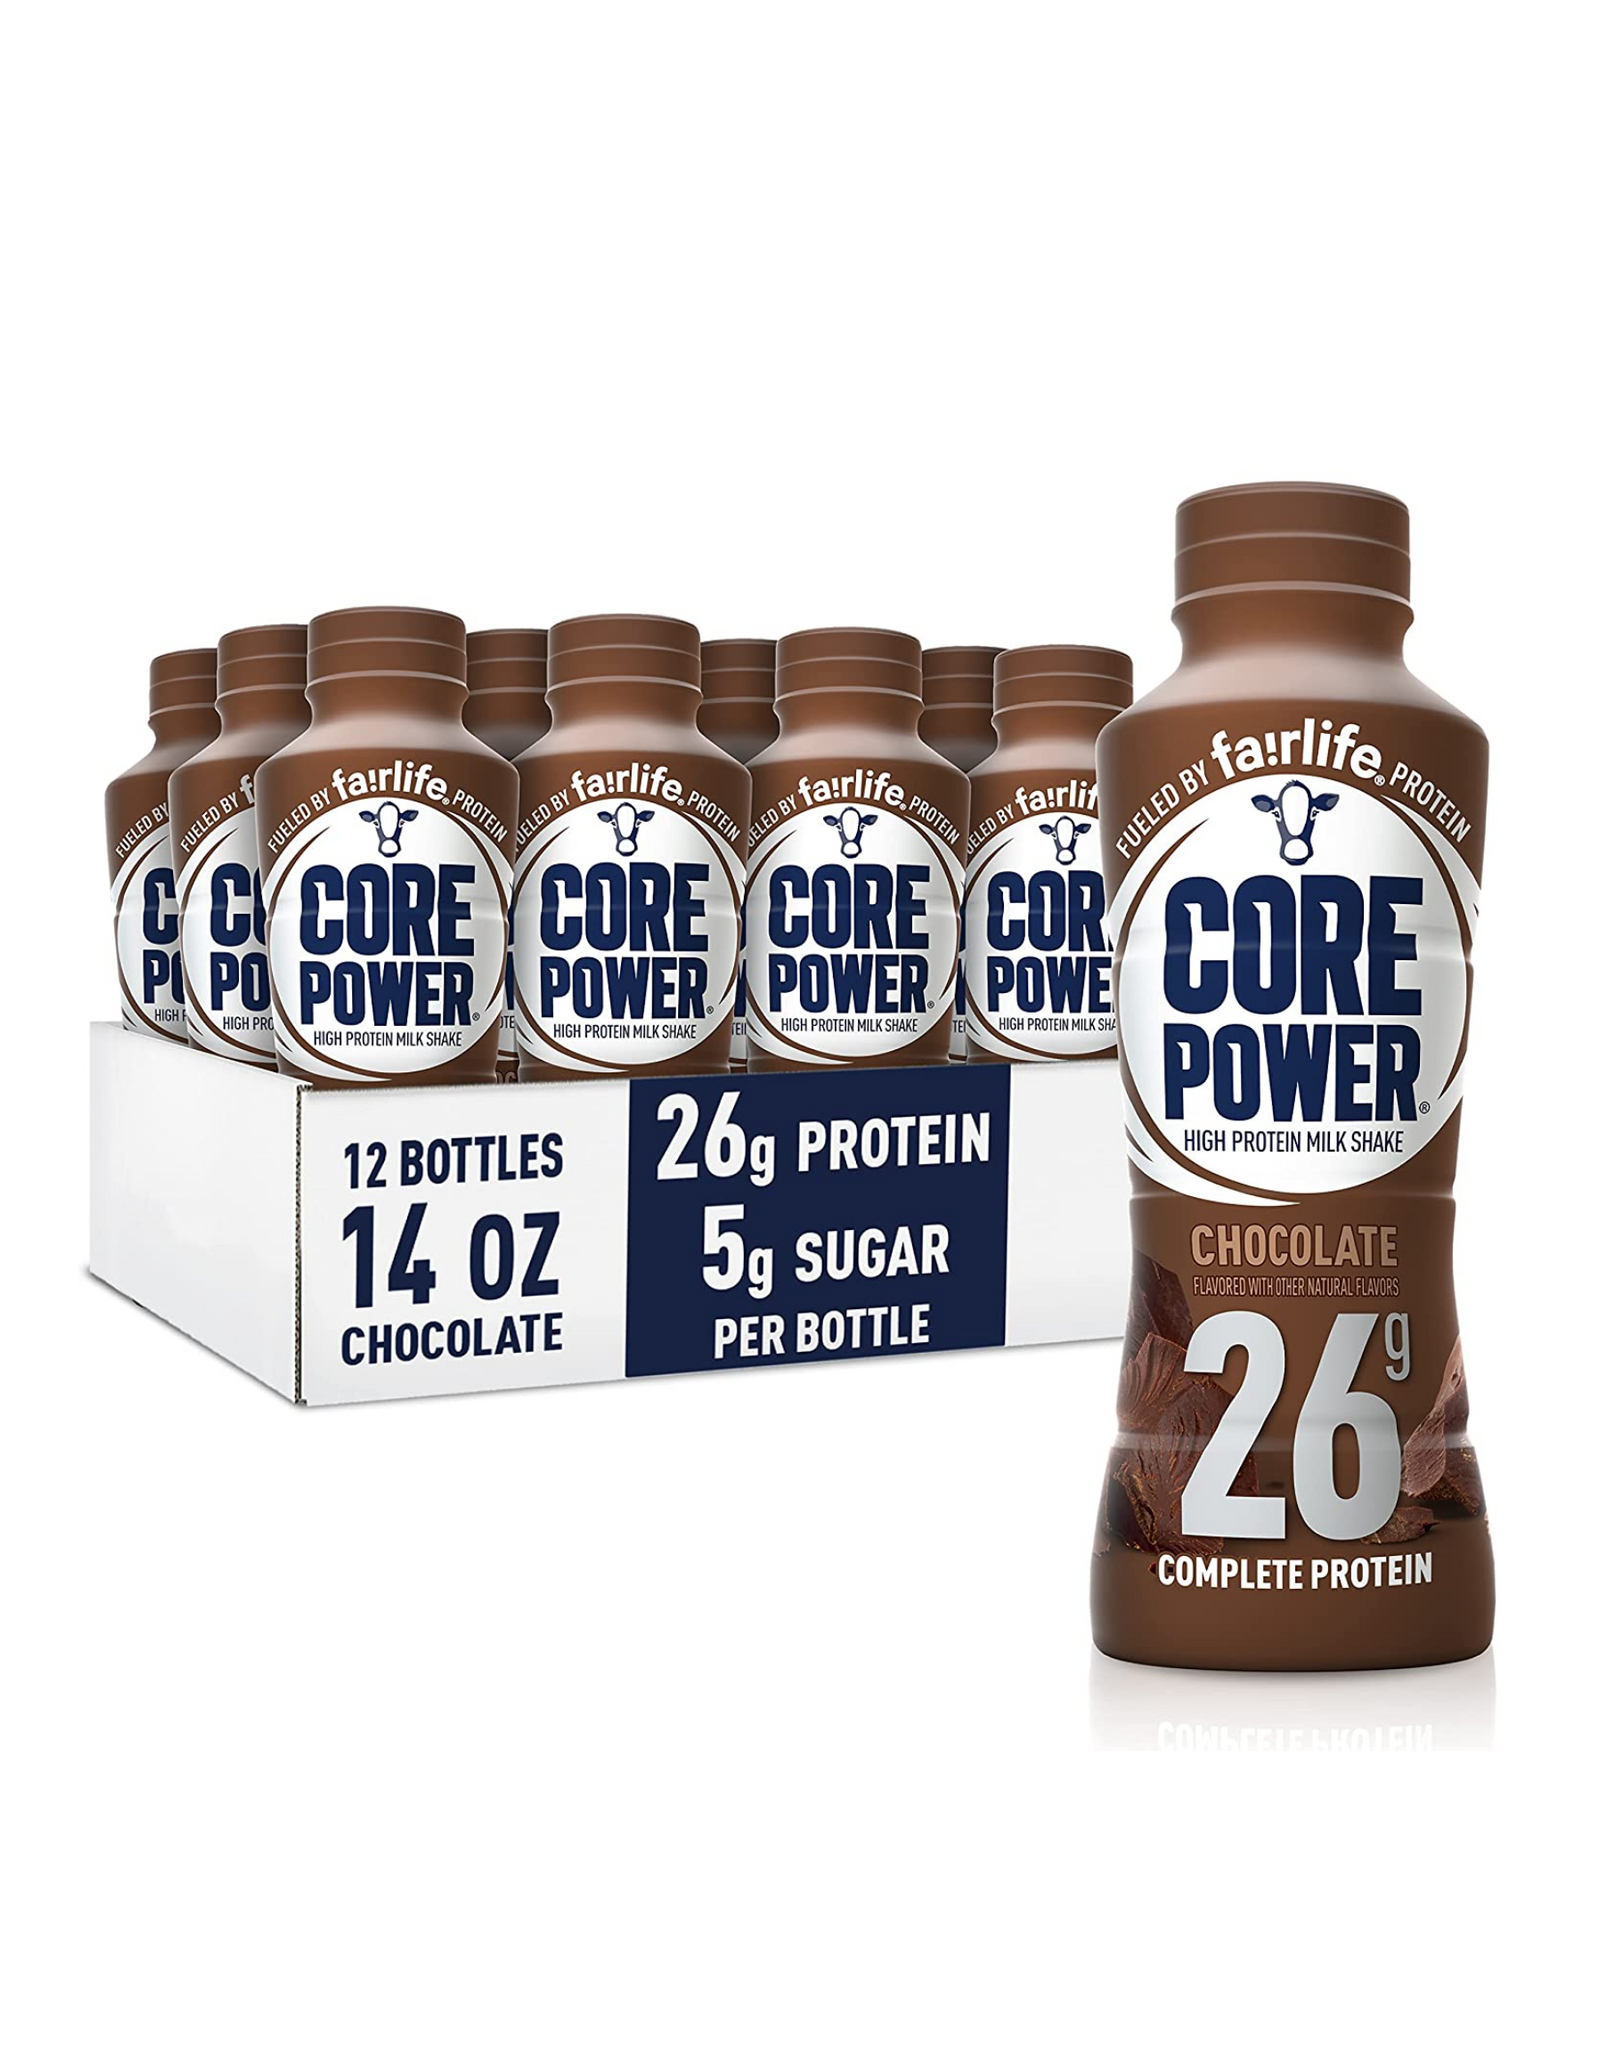 Fairlife Core Power 26g Protein Milk Shakes, Chocolate, 14 fl oz (Pack of 12)